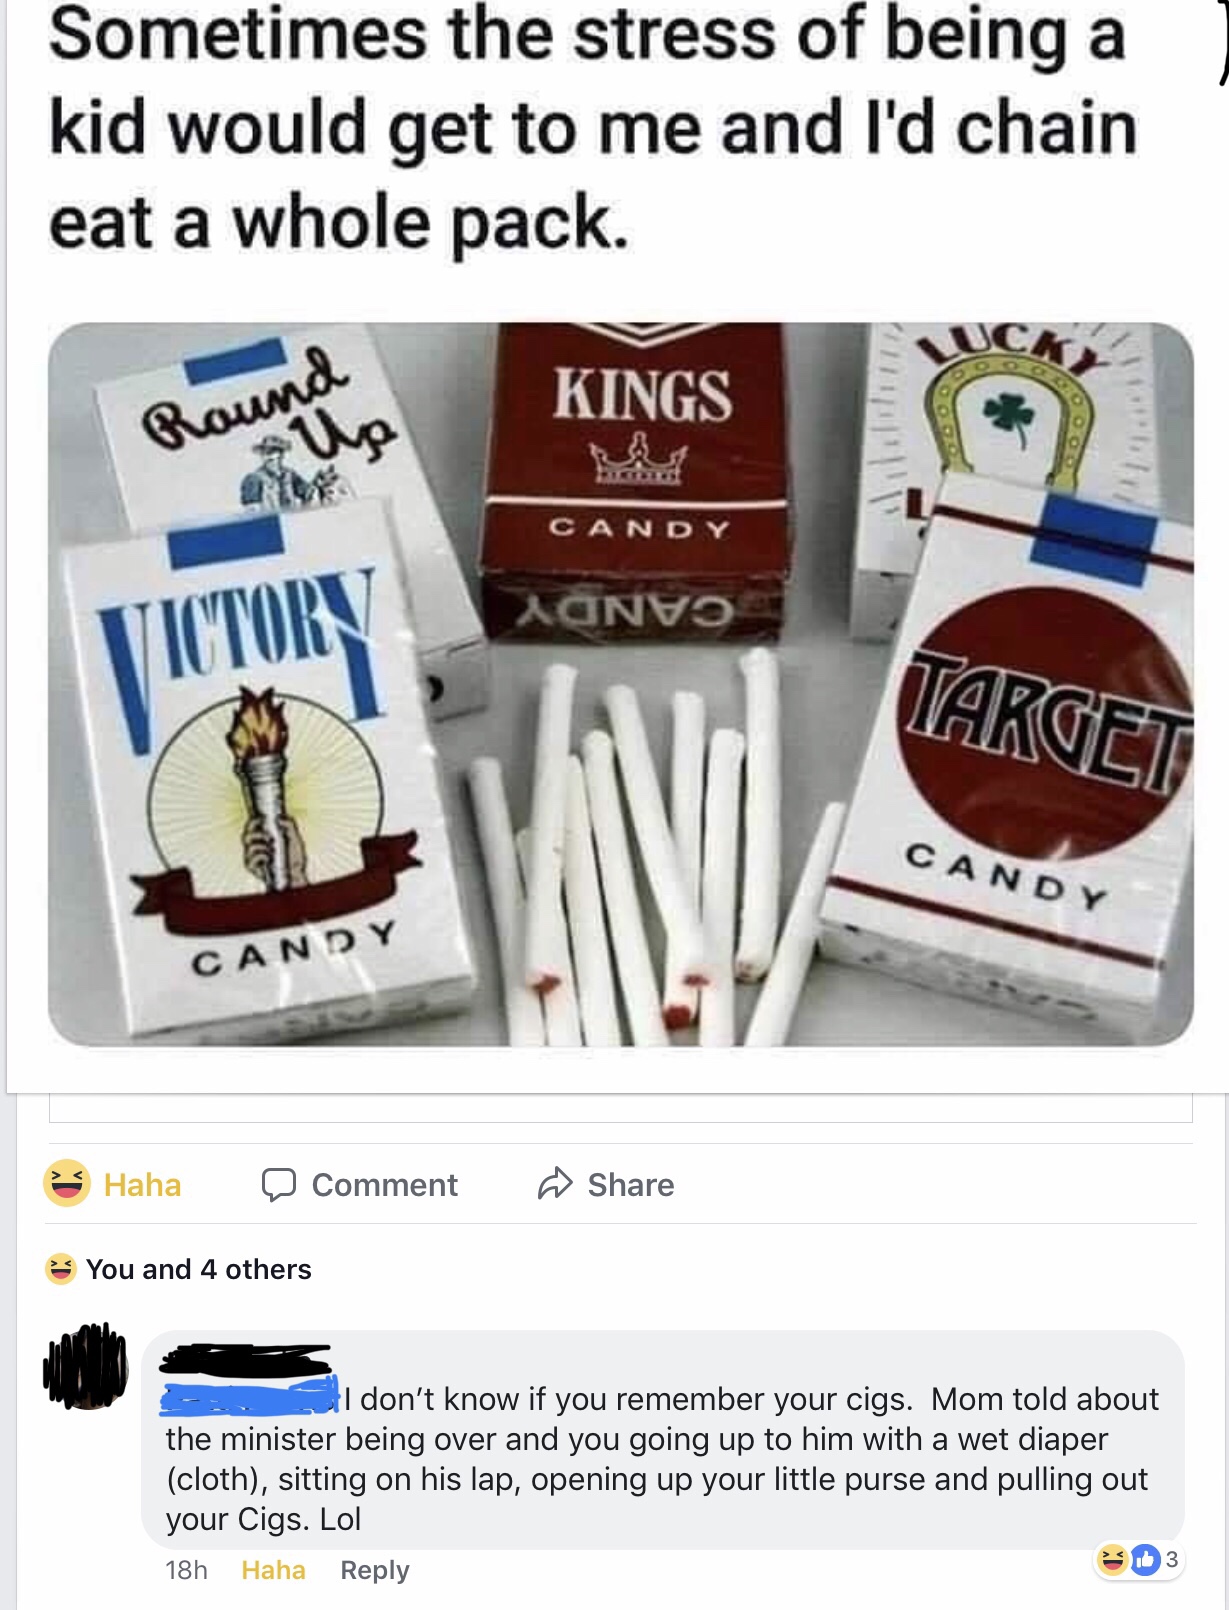 candy cigarettes - Sometimes the stress of being a kid would get to me and I'd chain eat a whole pack. Kings Round Candy Aanvo Tictory Target Candy Candy Haha D Comment @ You and 4 others il don't know if you remember your cigs. Mom told about the ministe